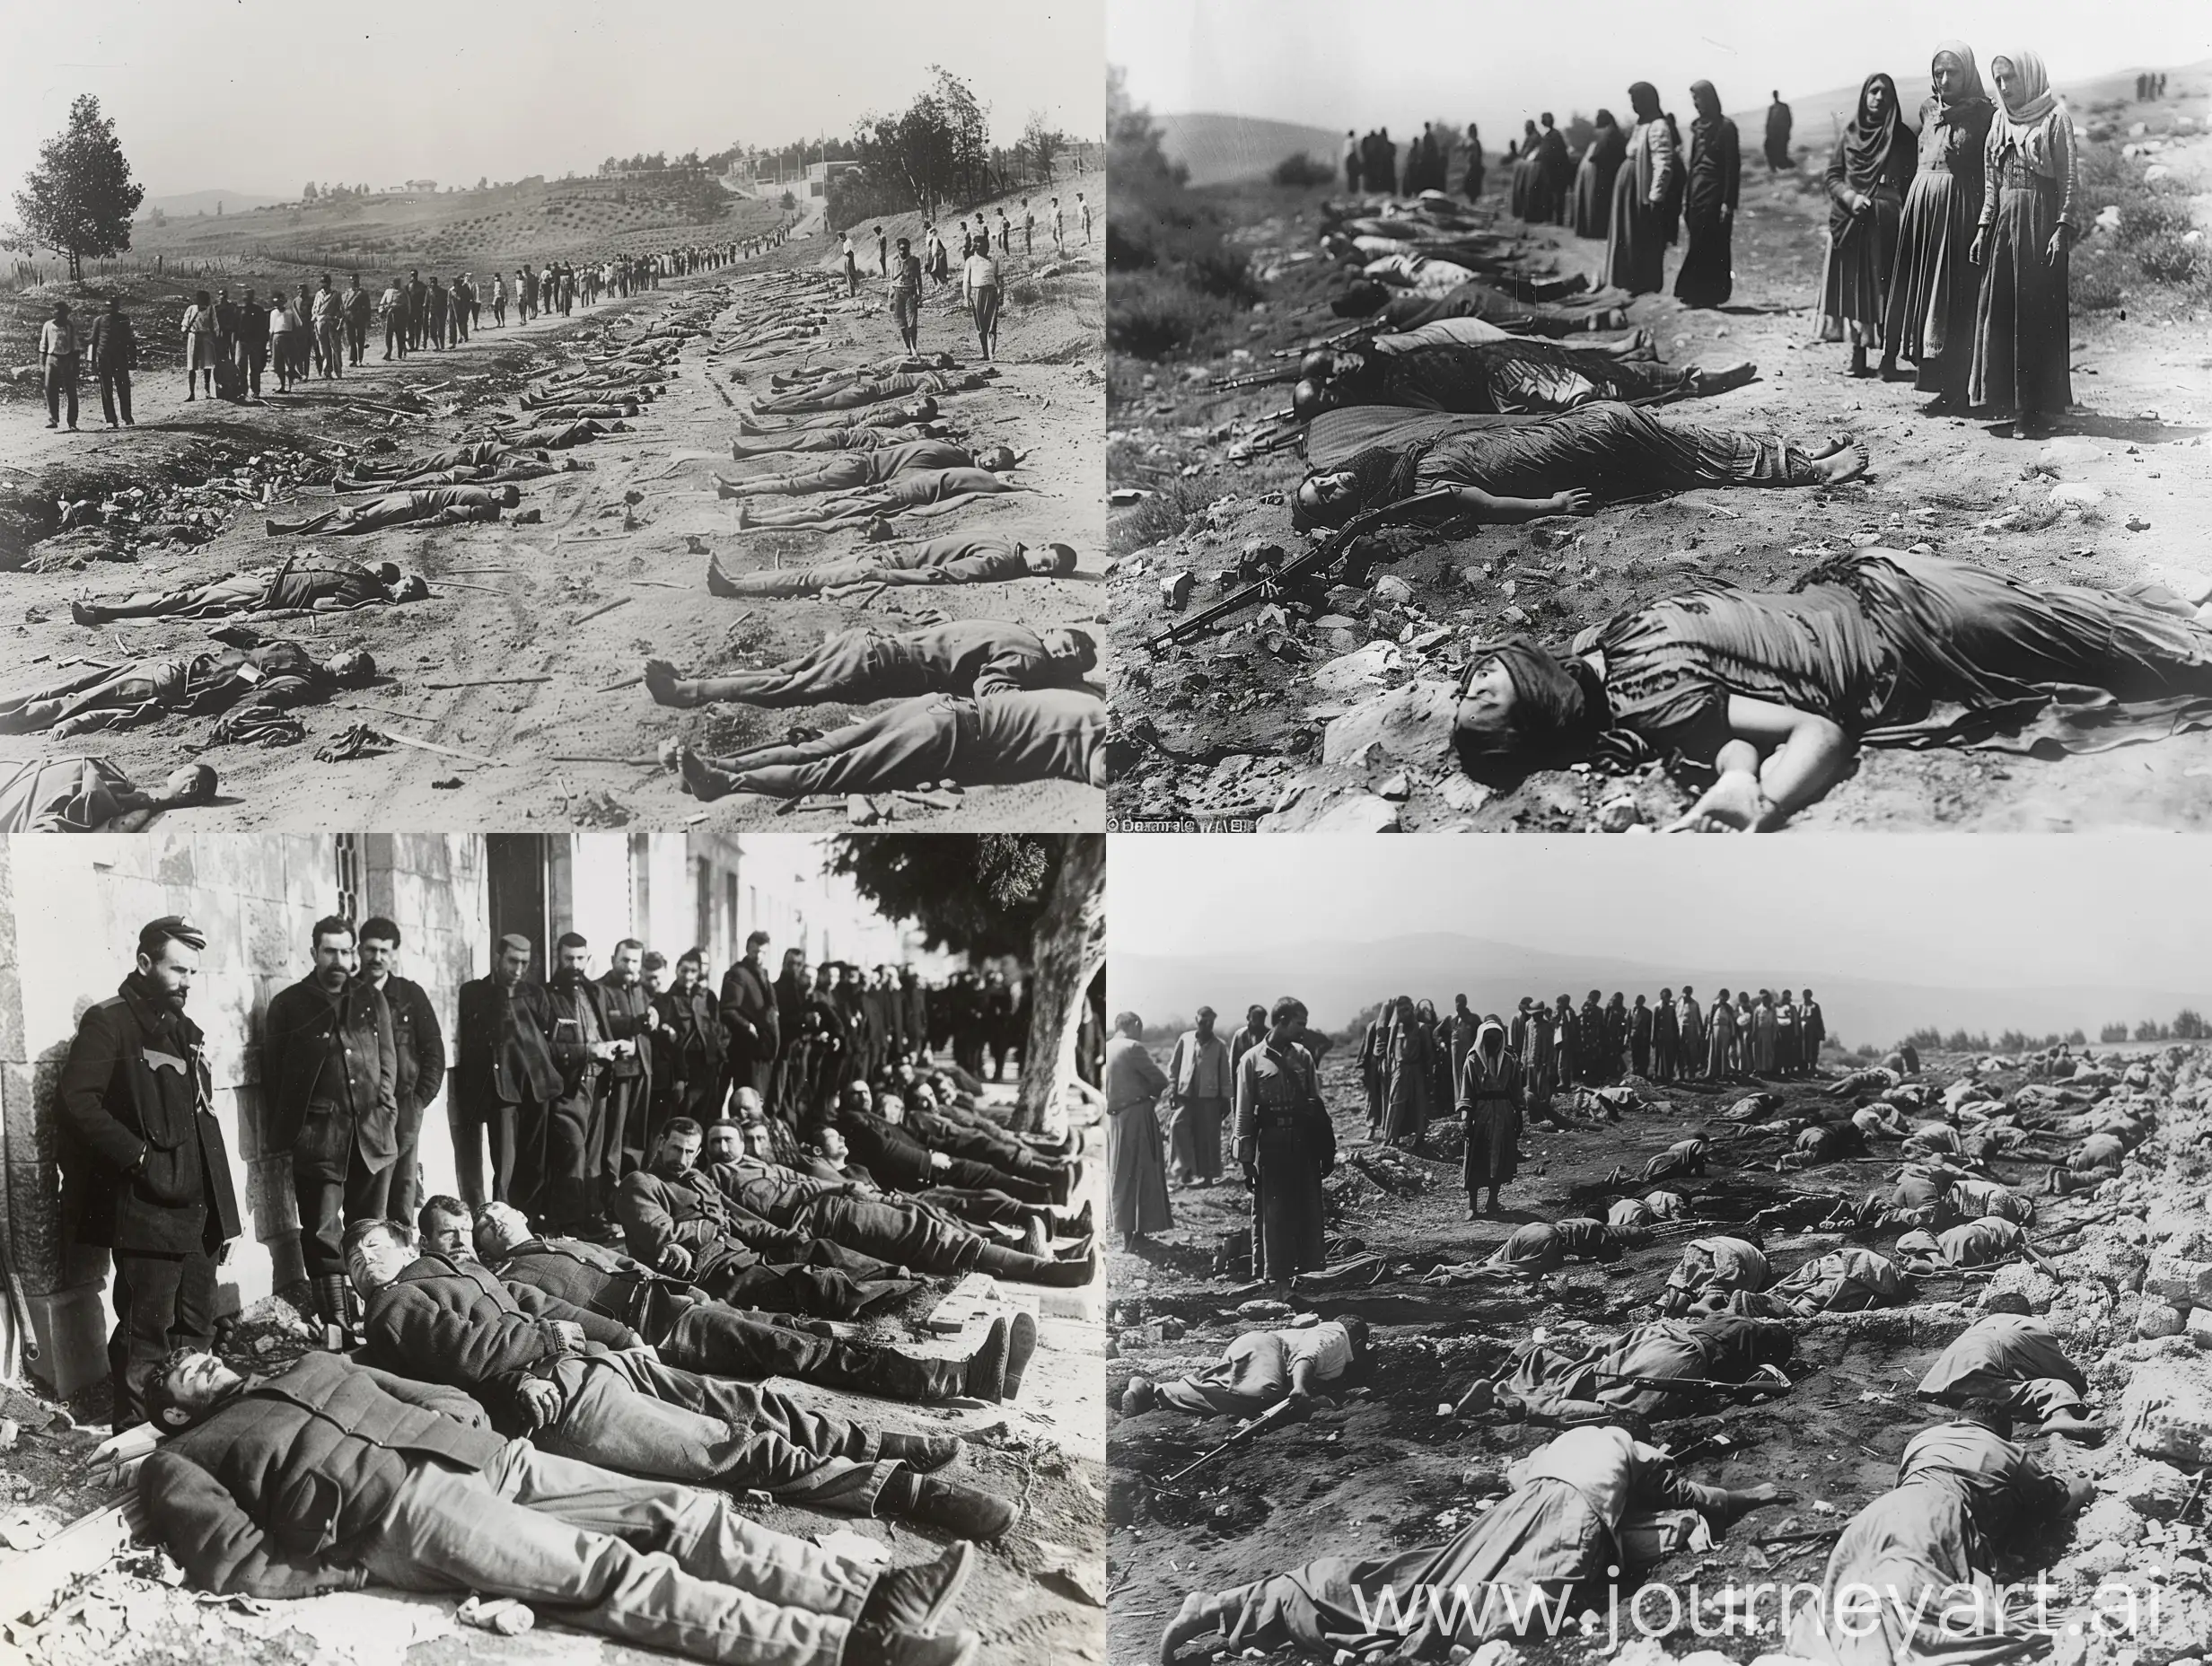 The Izmit massacres have gone down in history as one of the bloody pages of the Turkish-Greek War (1919-1922). These massacres took place in the Izmit region and were the result of the atrocities and atrocities committed by the Greek forces and their supporters against the Turks. During the Greek occupation, the Turkish people in the region suffered great pain, suffered serious loss of life and were subjected to gross violations of human rights.